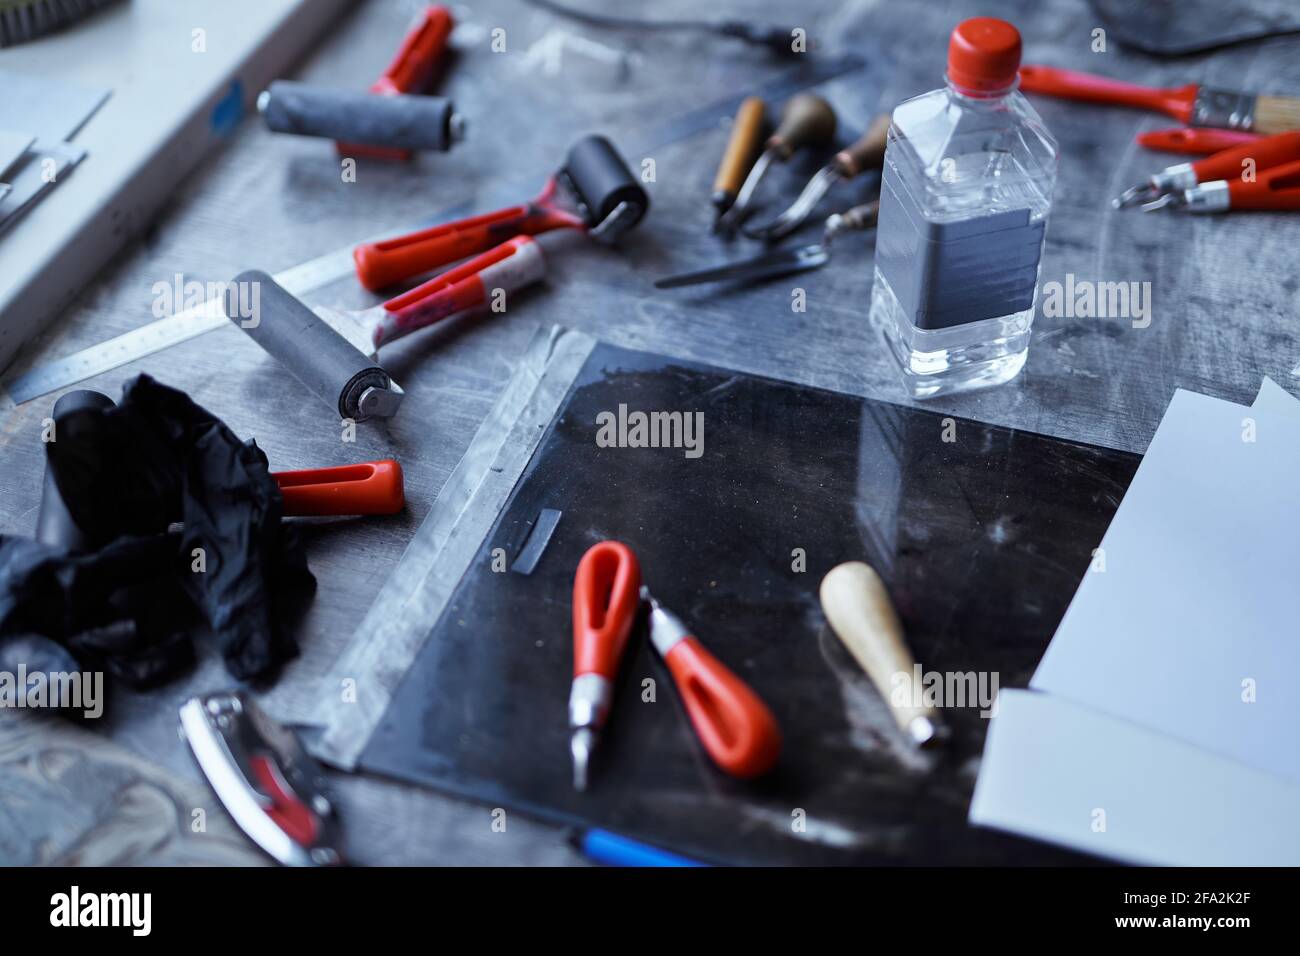 Linocut Materials and Tools Stock Photo - Image of arts, pastime: 113073176